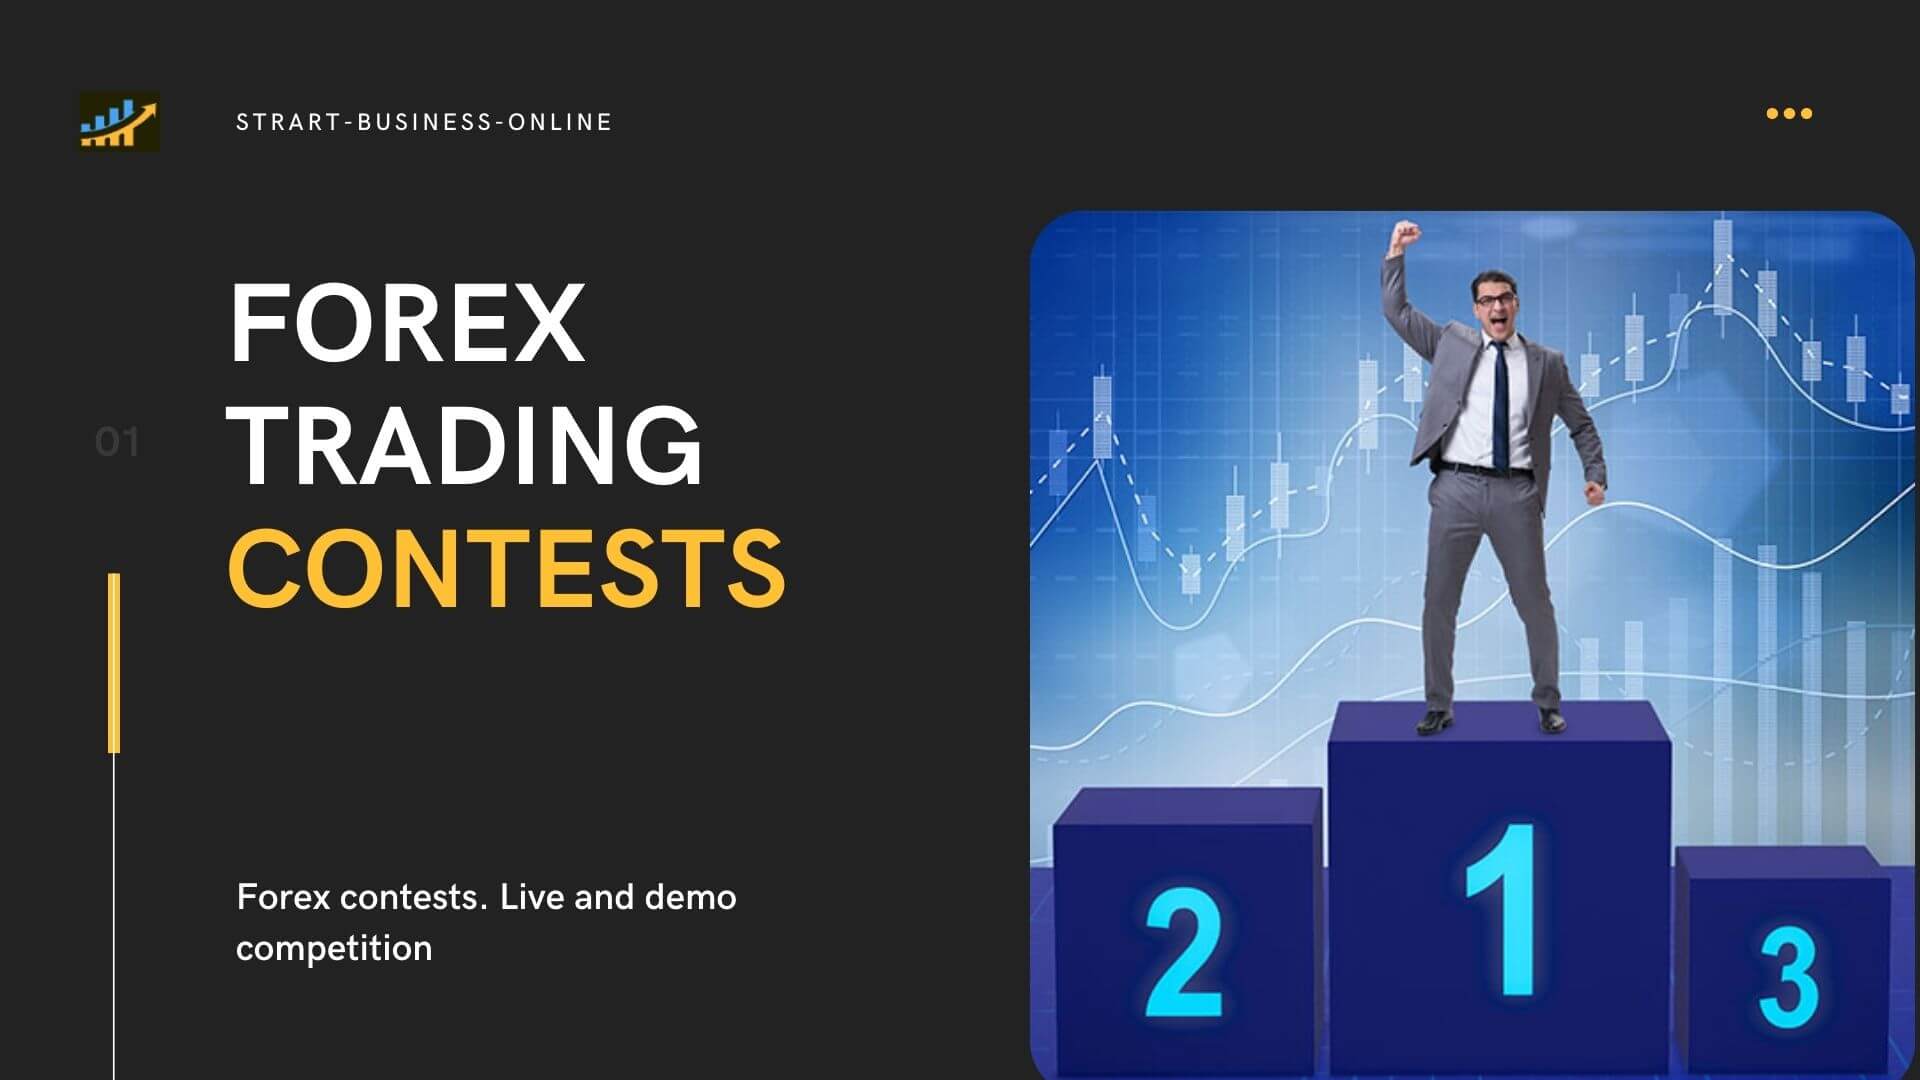 Forex contests. Live and demo competition